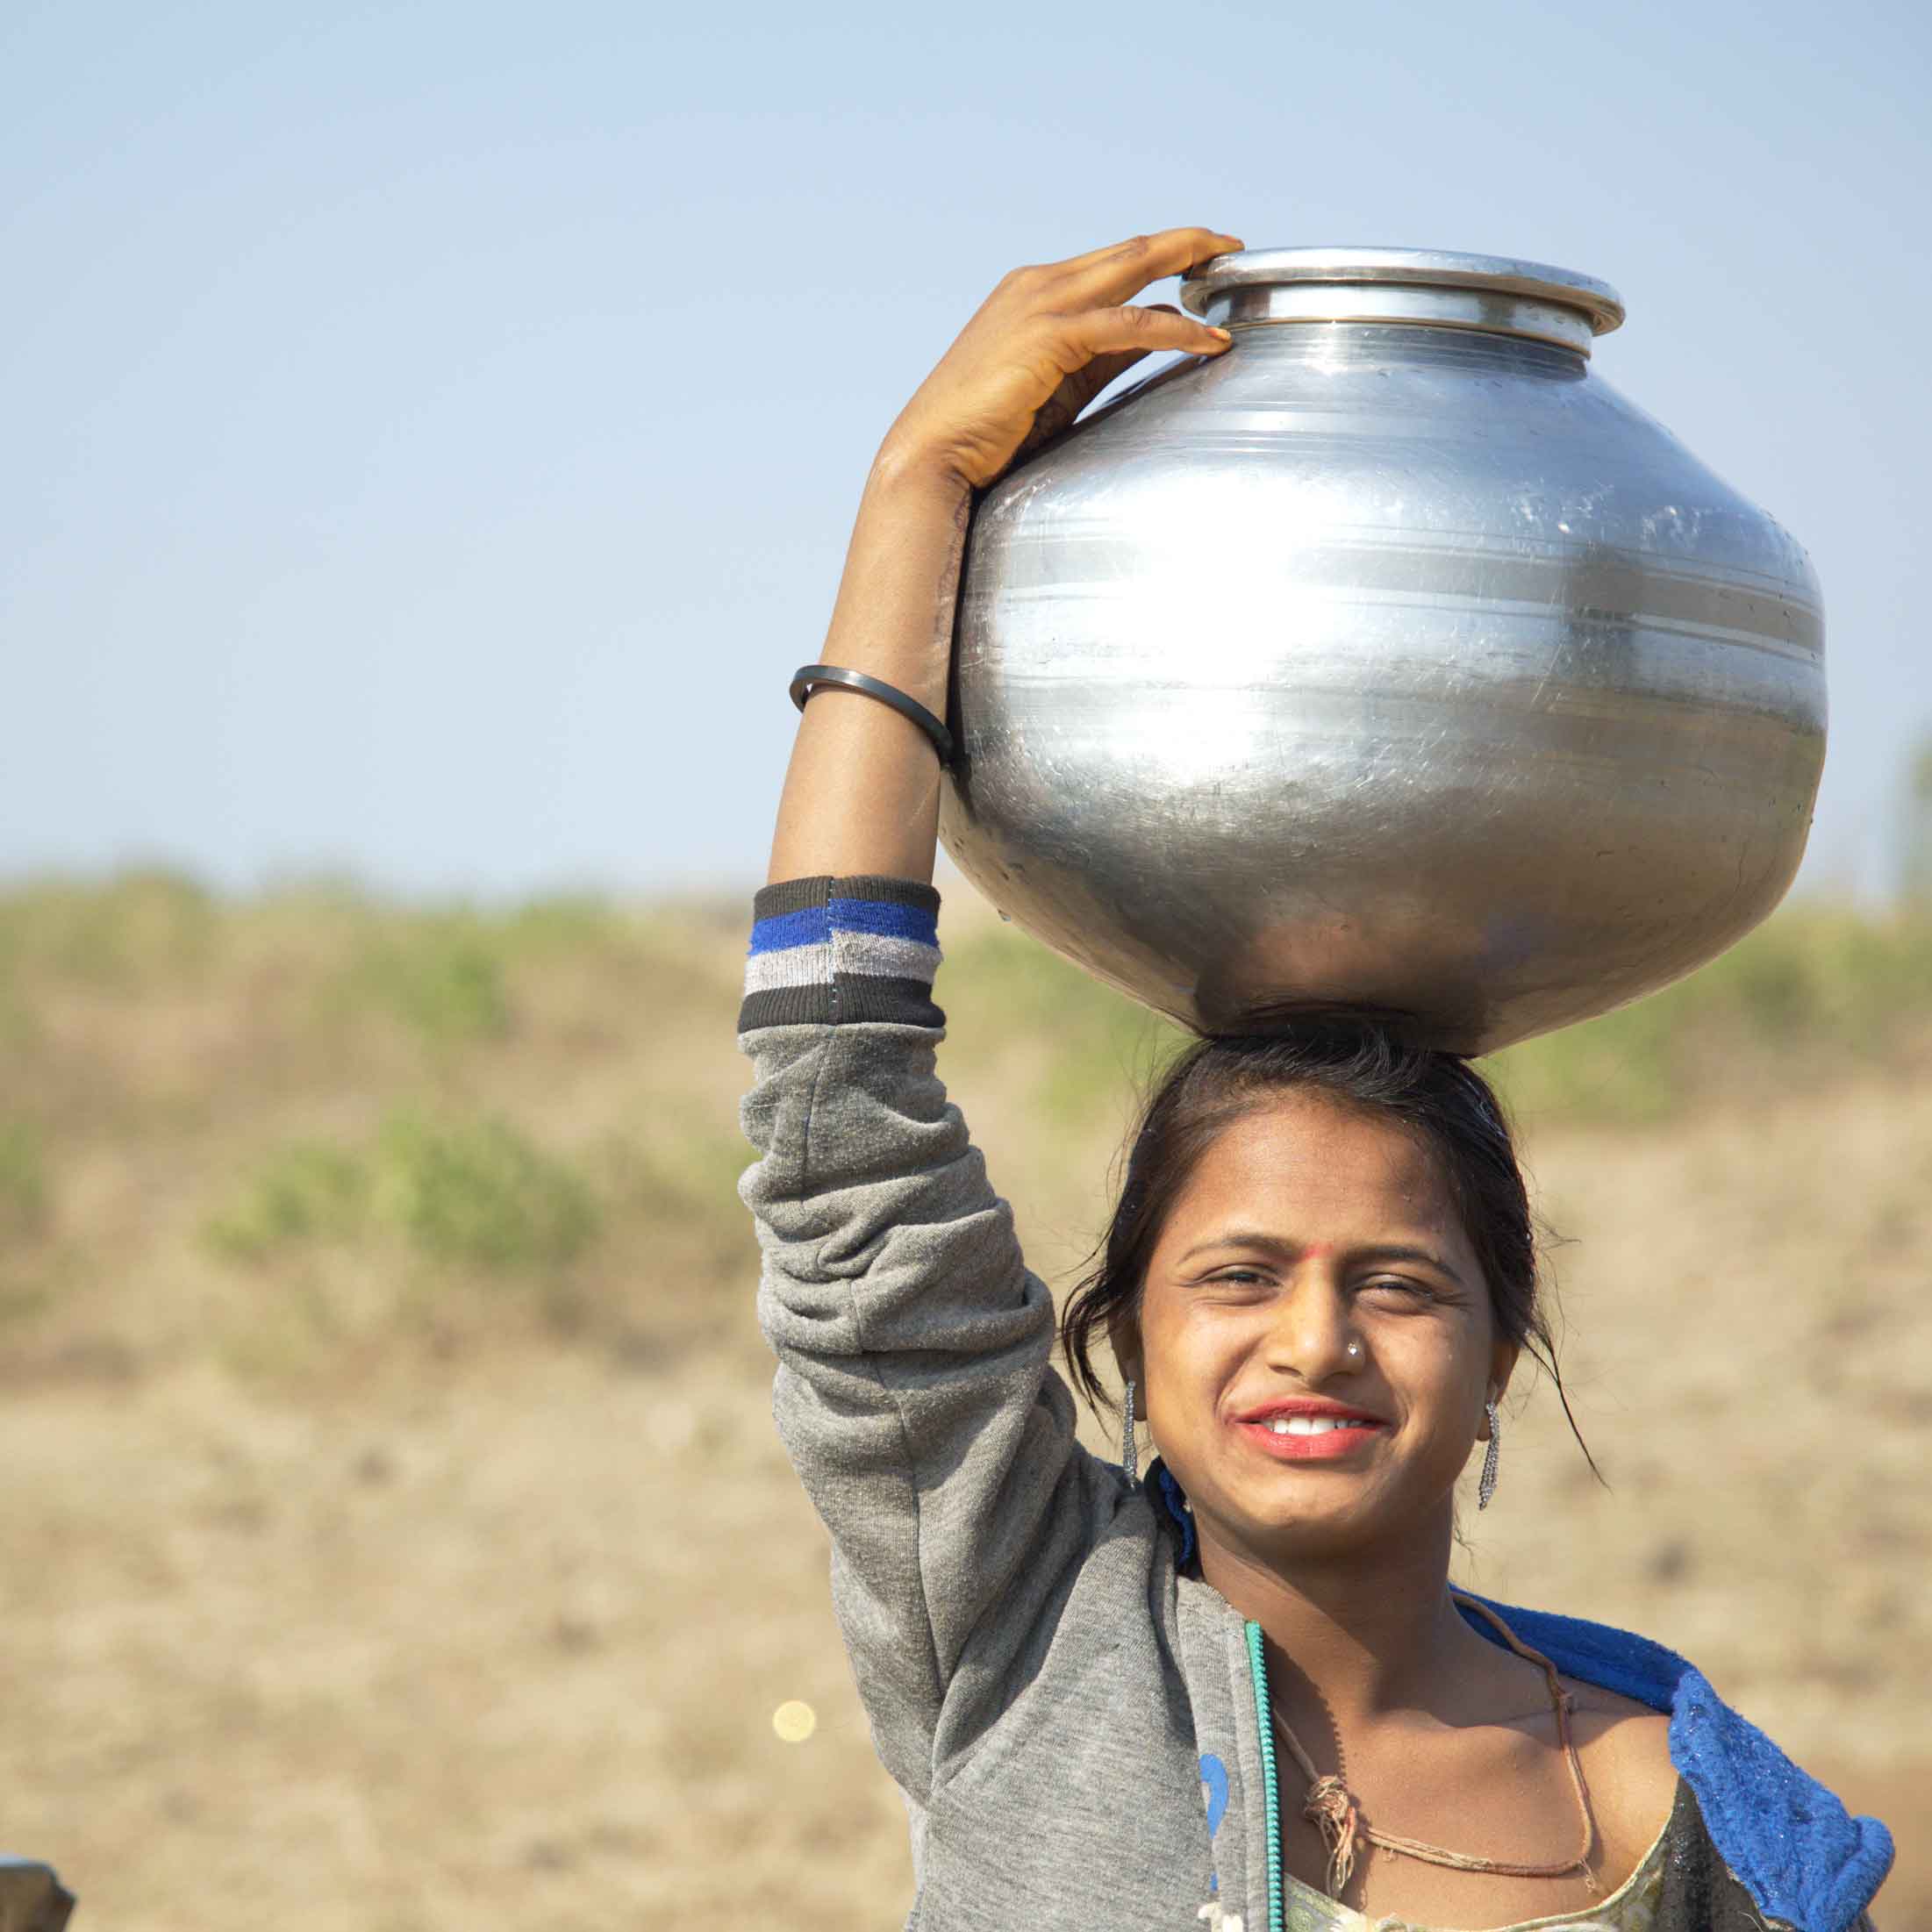 A lady holds a large silver pot on her head and stands in a barren field. 